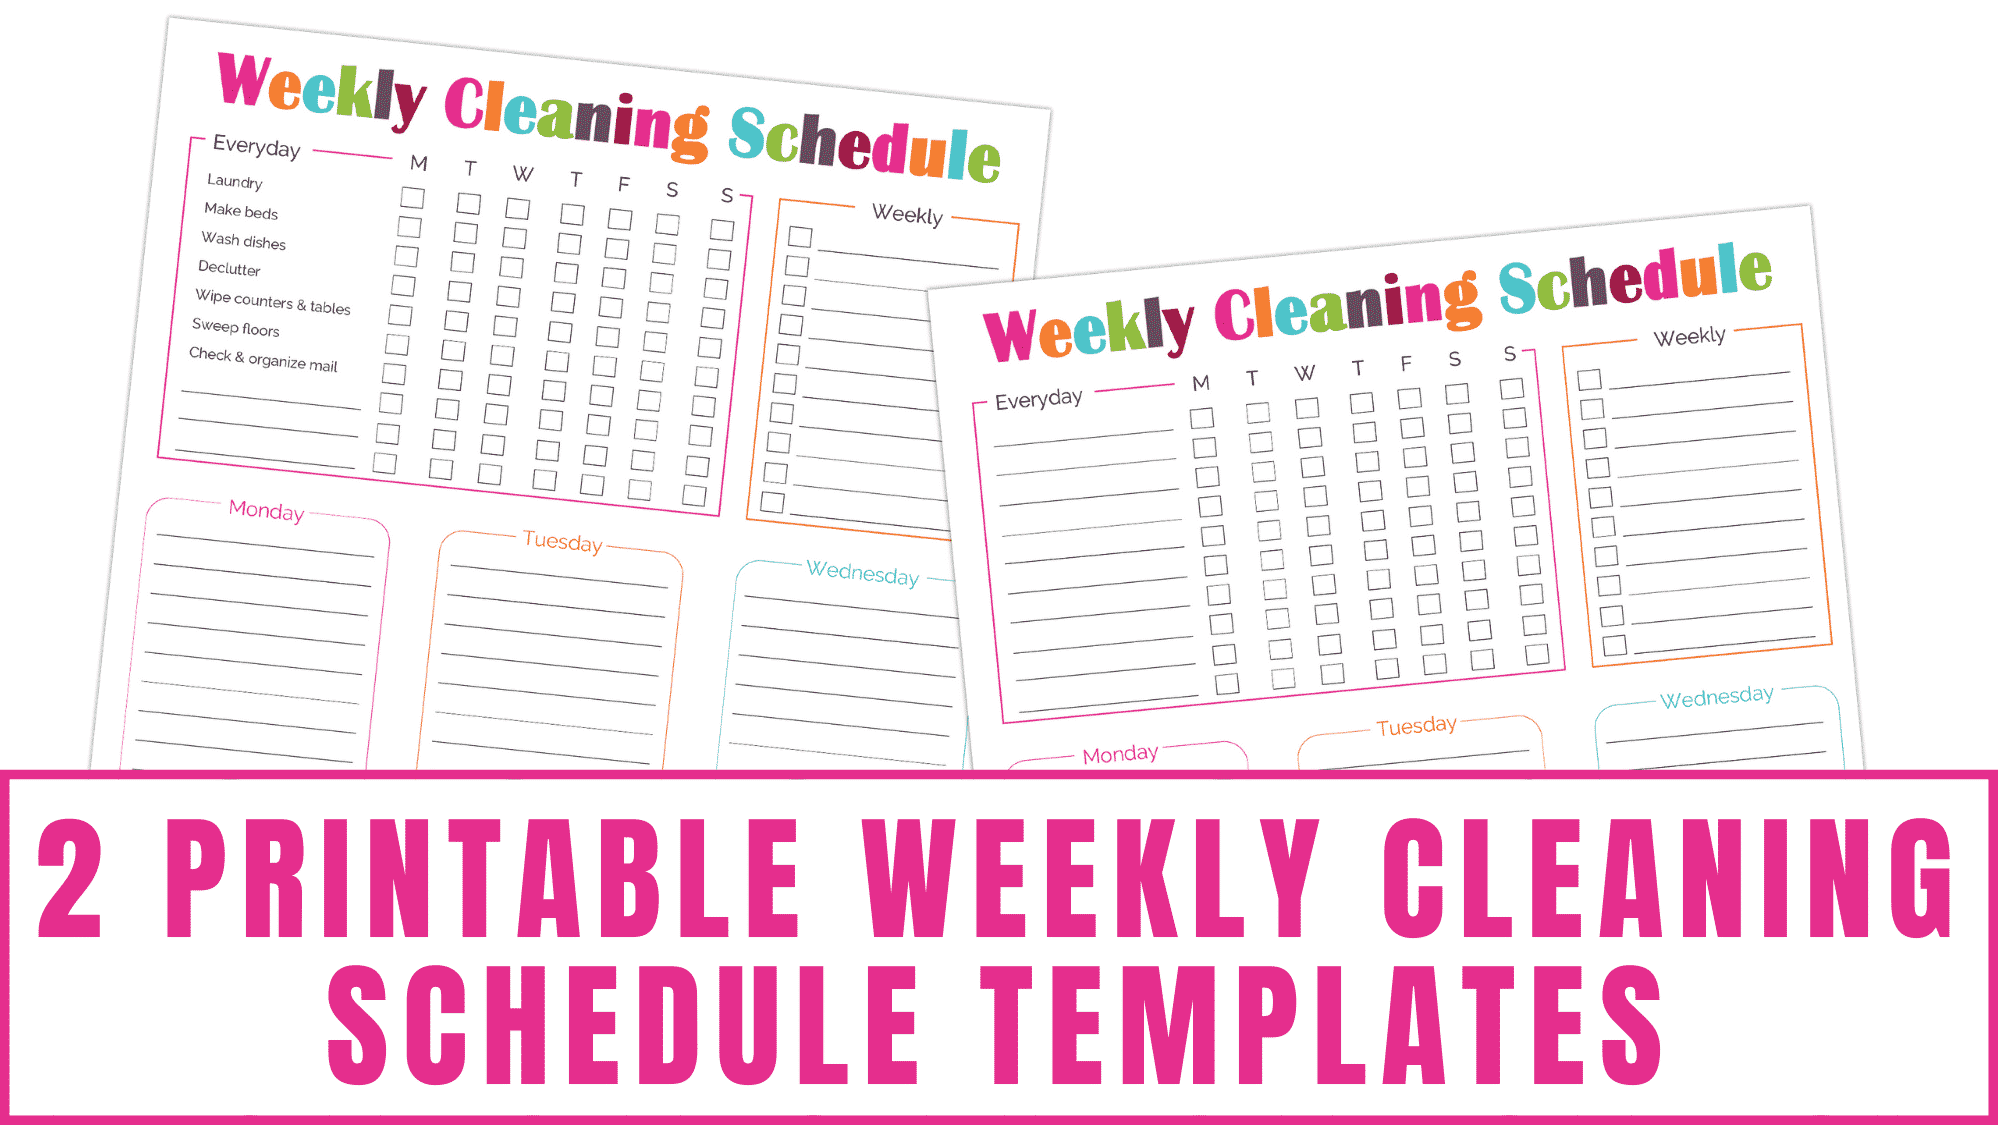 10 Printable Weekly Cleaning Schedule Templates - Freebie Finding Mom Inside Blank Cleaning Schedule Template